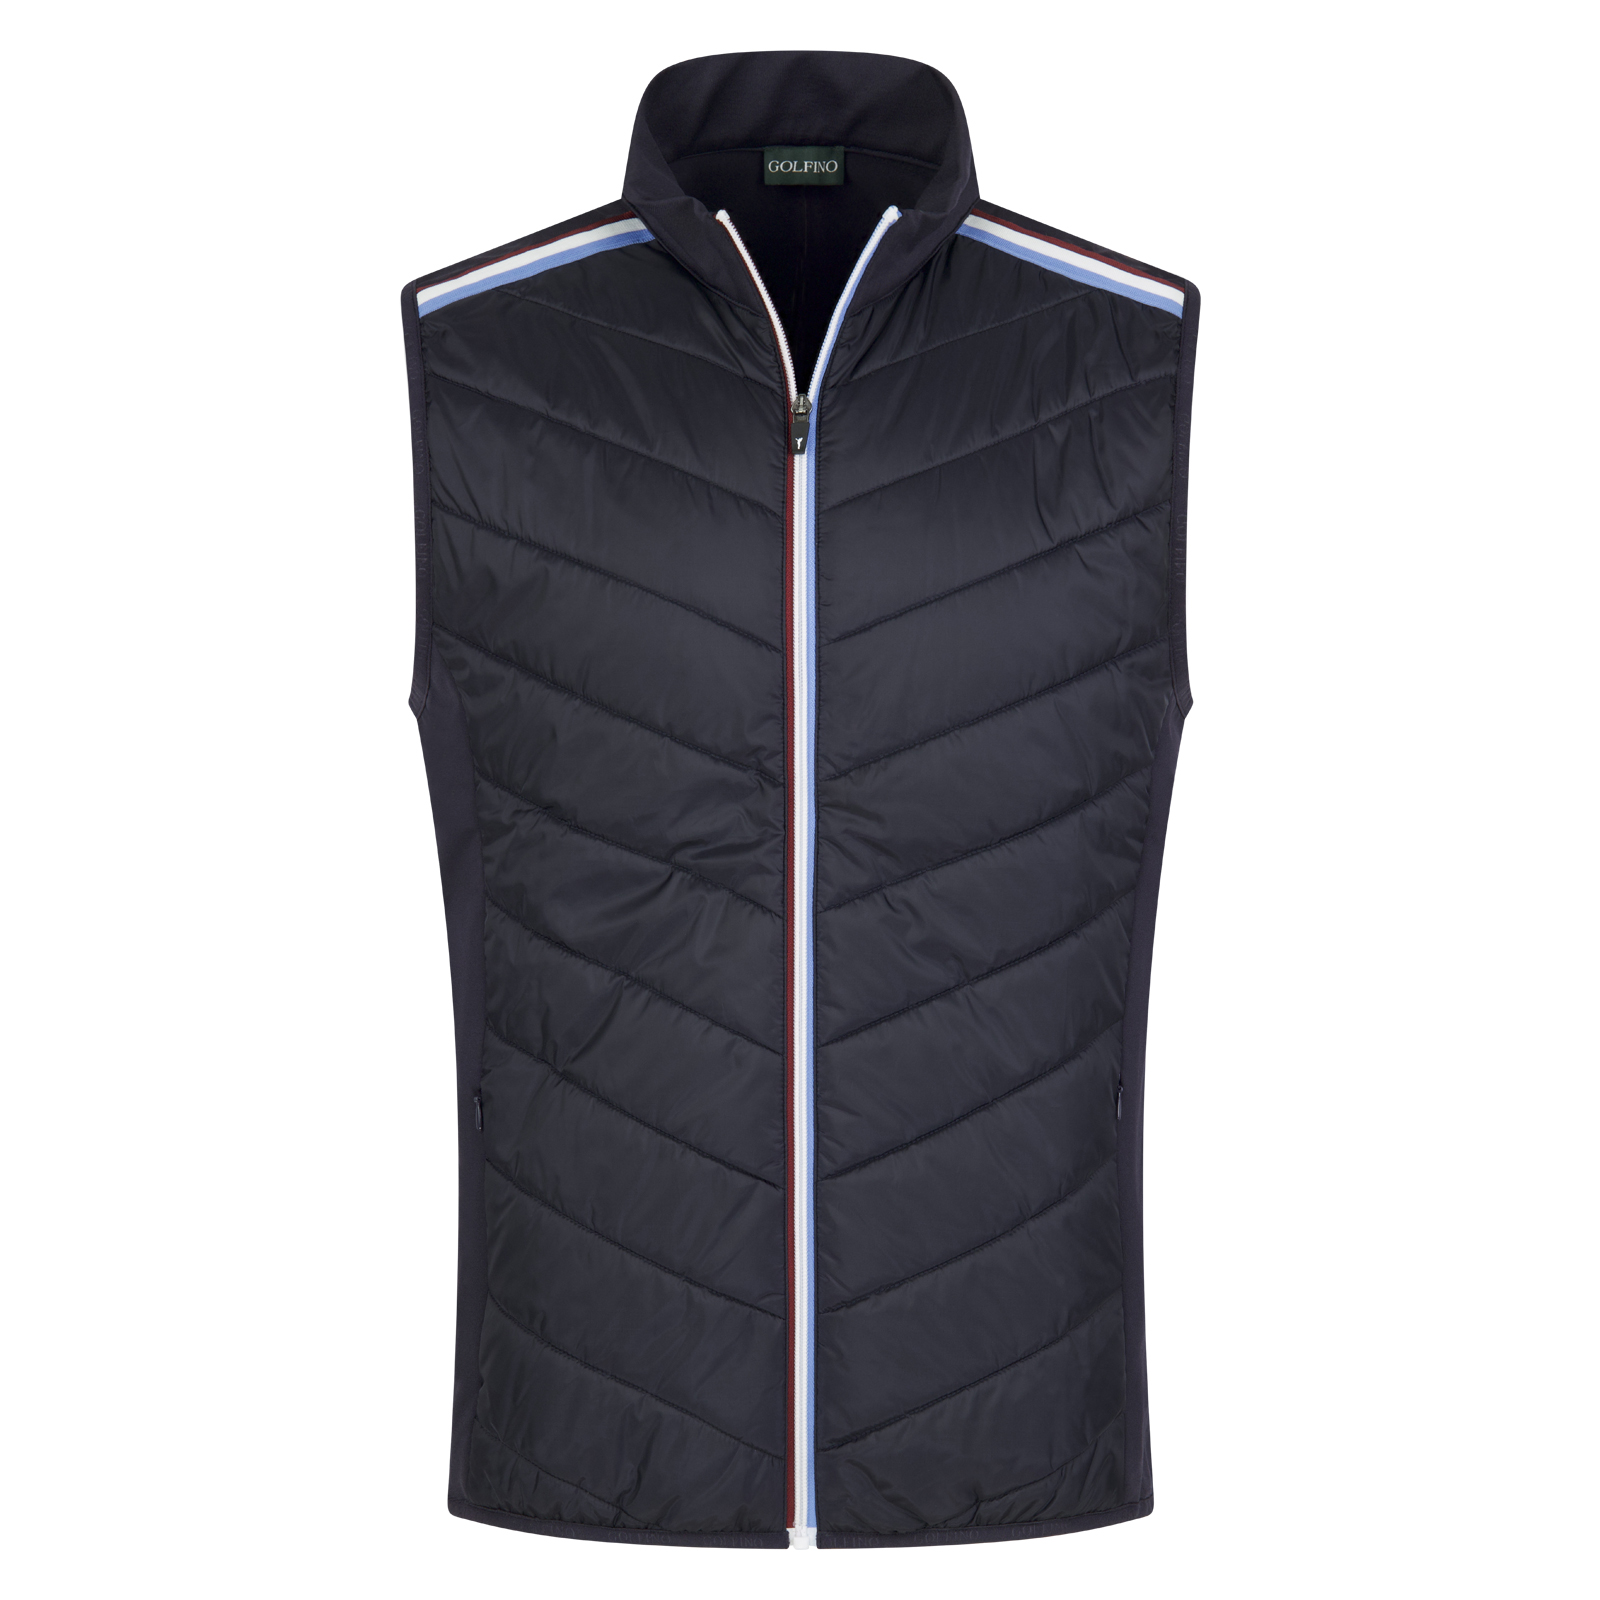 Men's windproof golf gilet with cold protection function